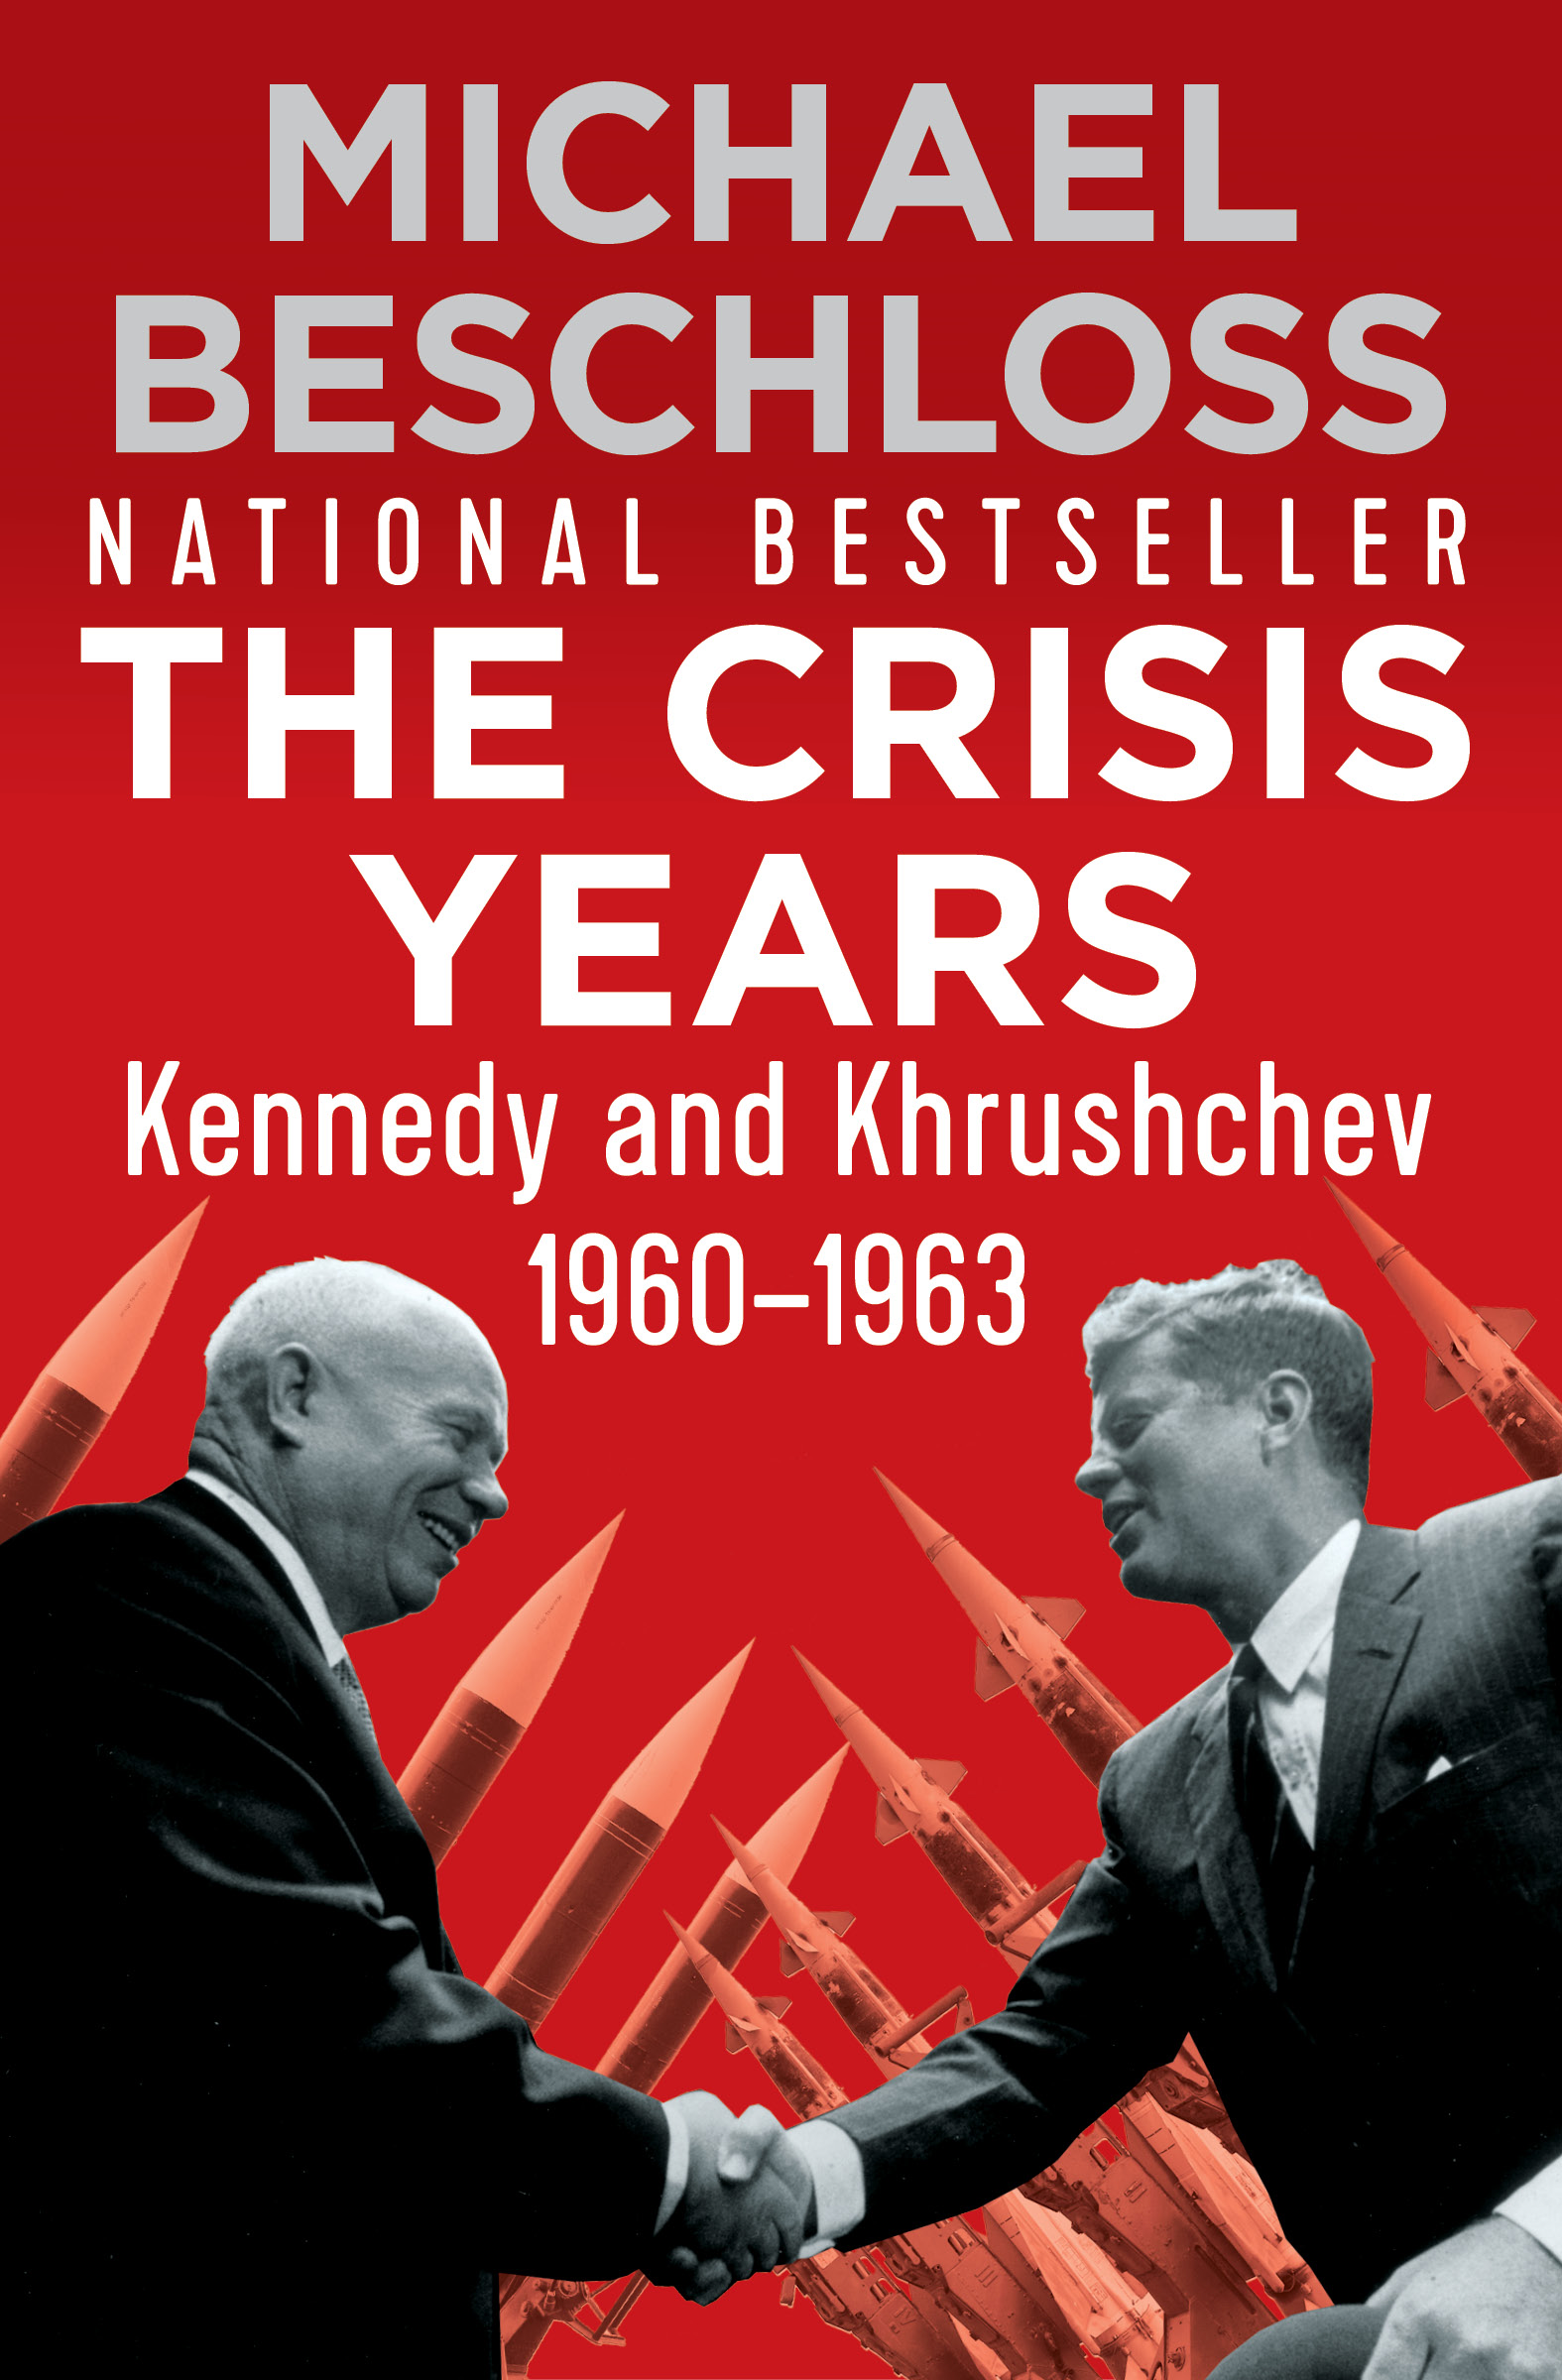 The Crisis Years Kennedy and Krushchev 19601963 Michael Beschloss - photo 1